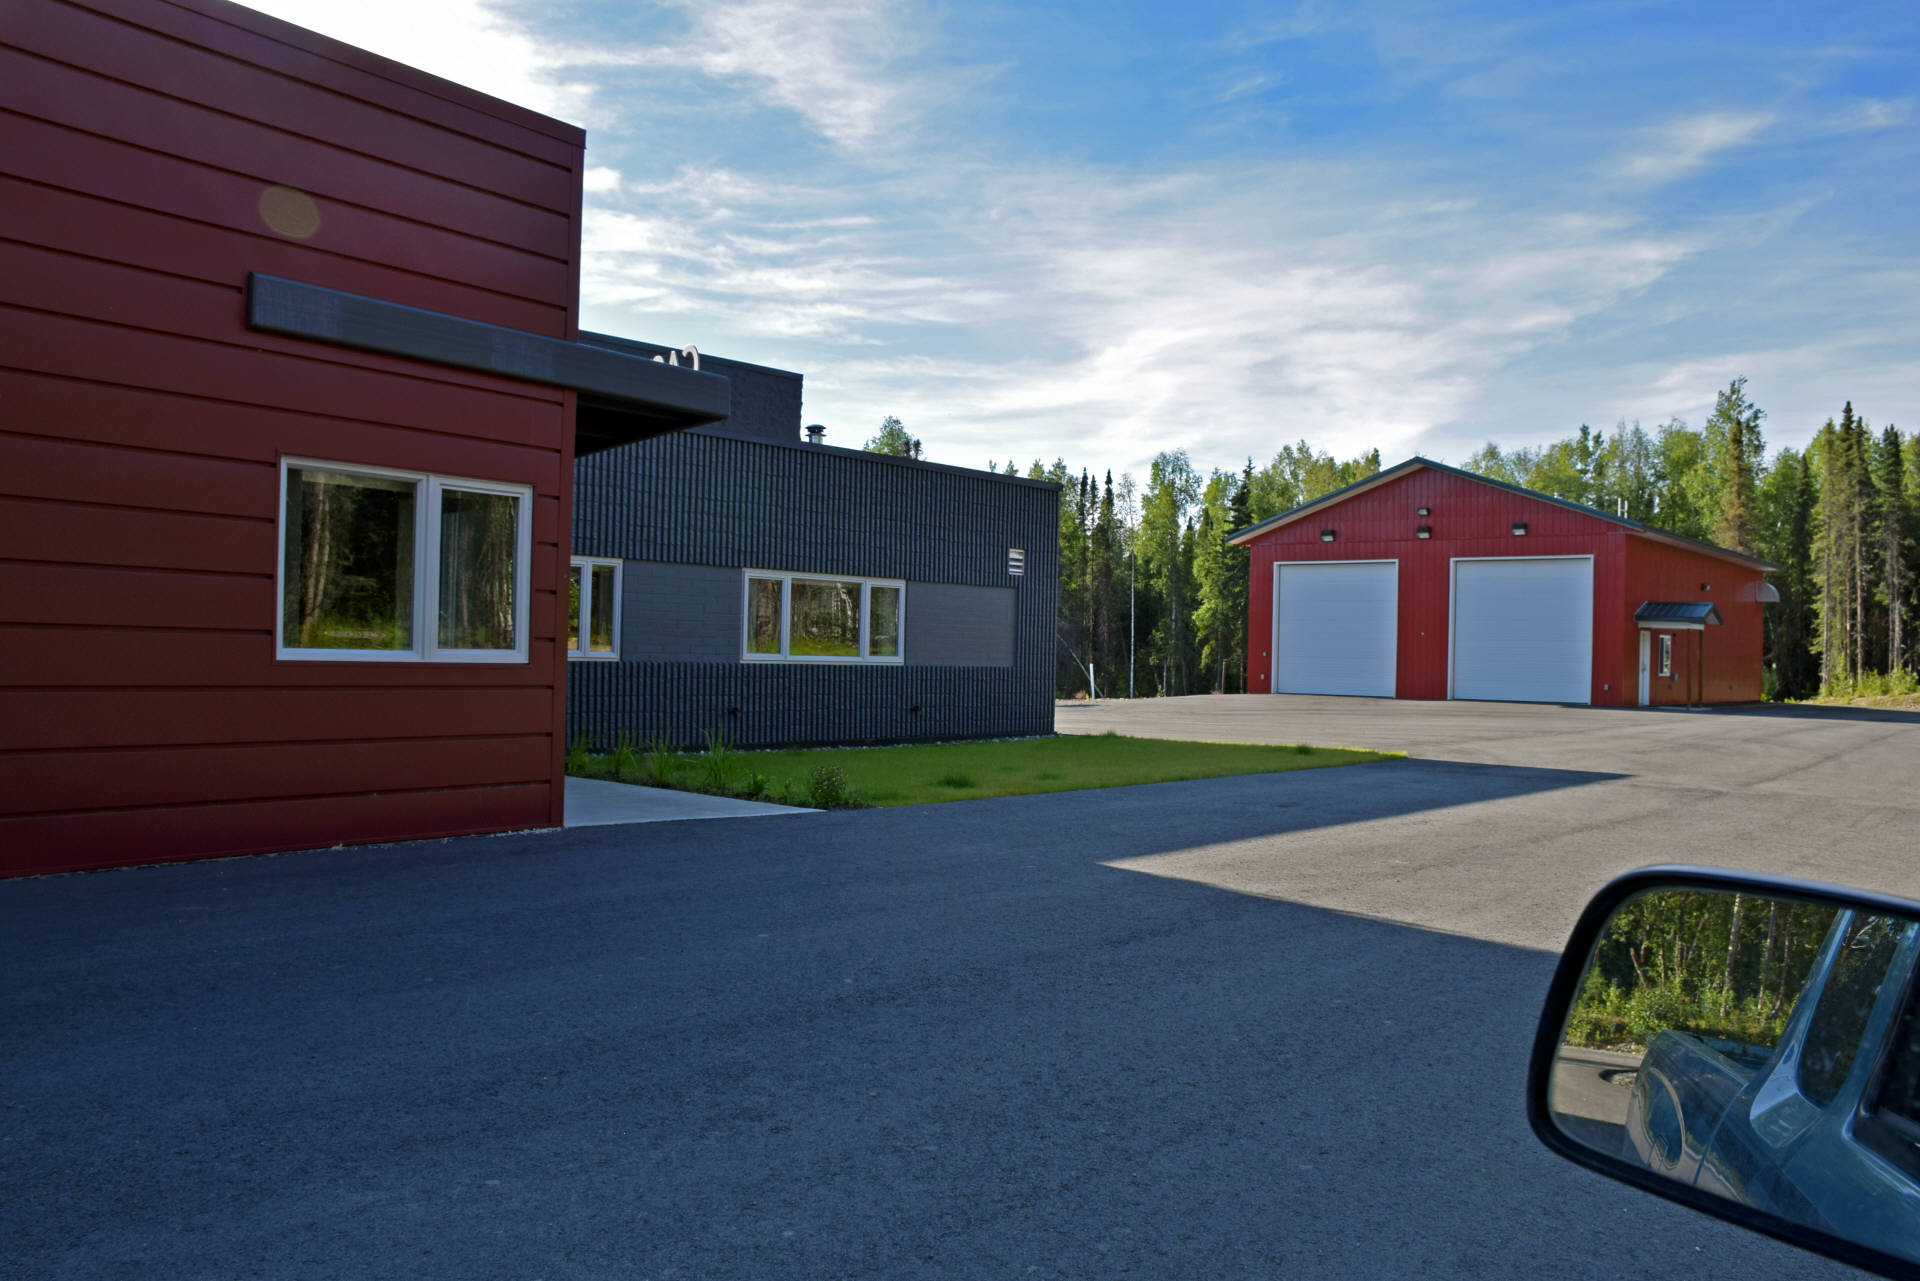 Caswell Fire Department, PSB 13-1 at Caswell Lakes Subdivision, two minutes away from us. Address of fire station: 19631 E. Deep Woods Way, Willow, AK 99688, USA.